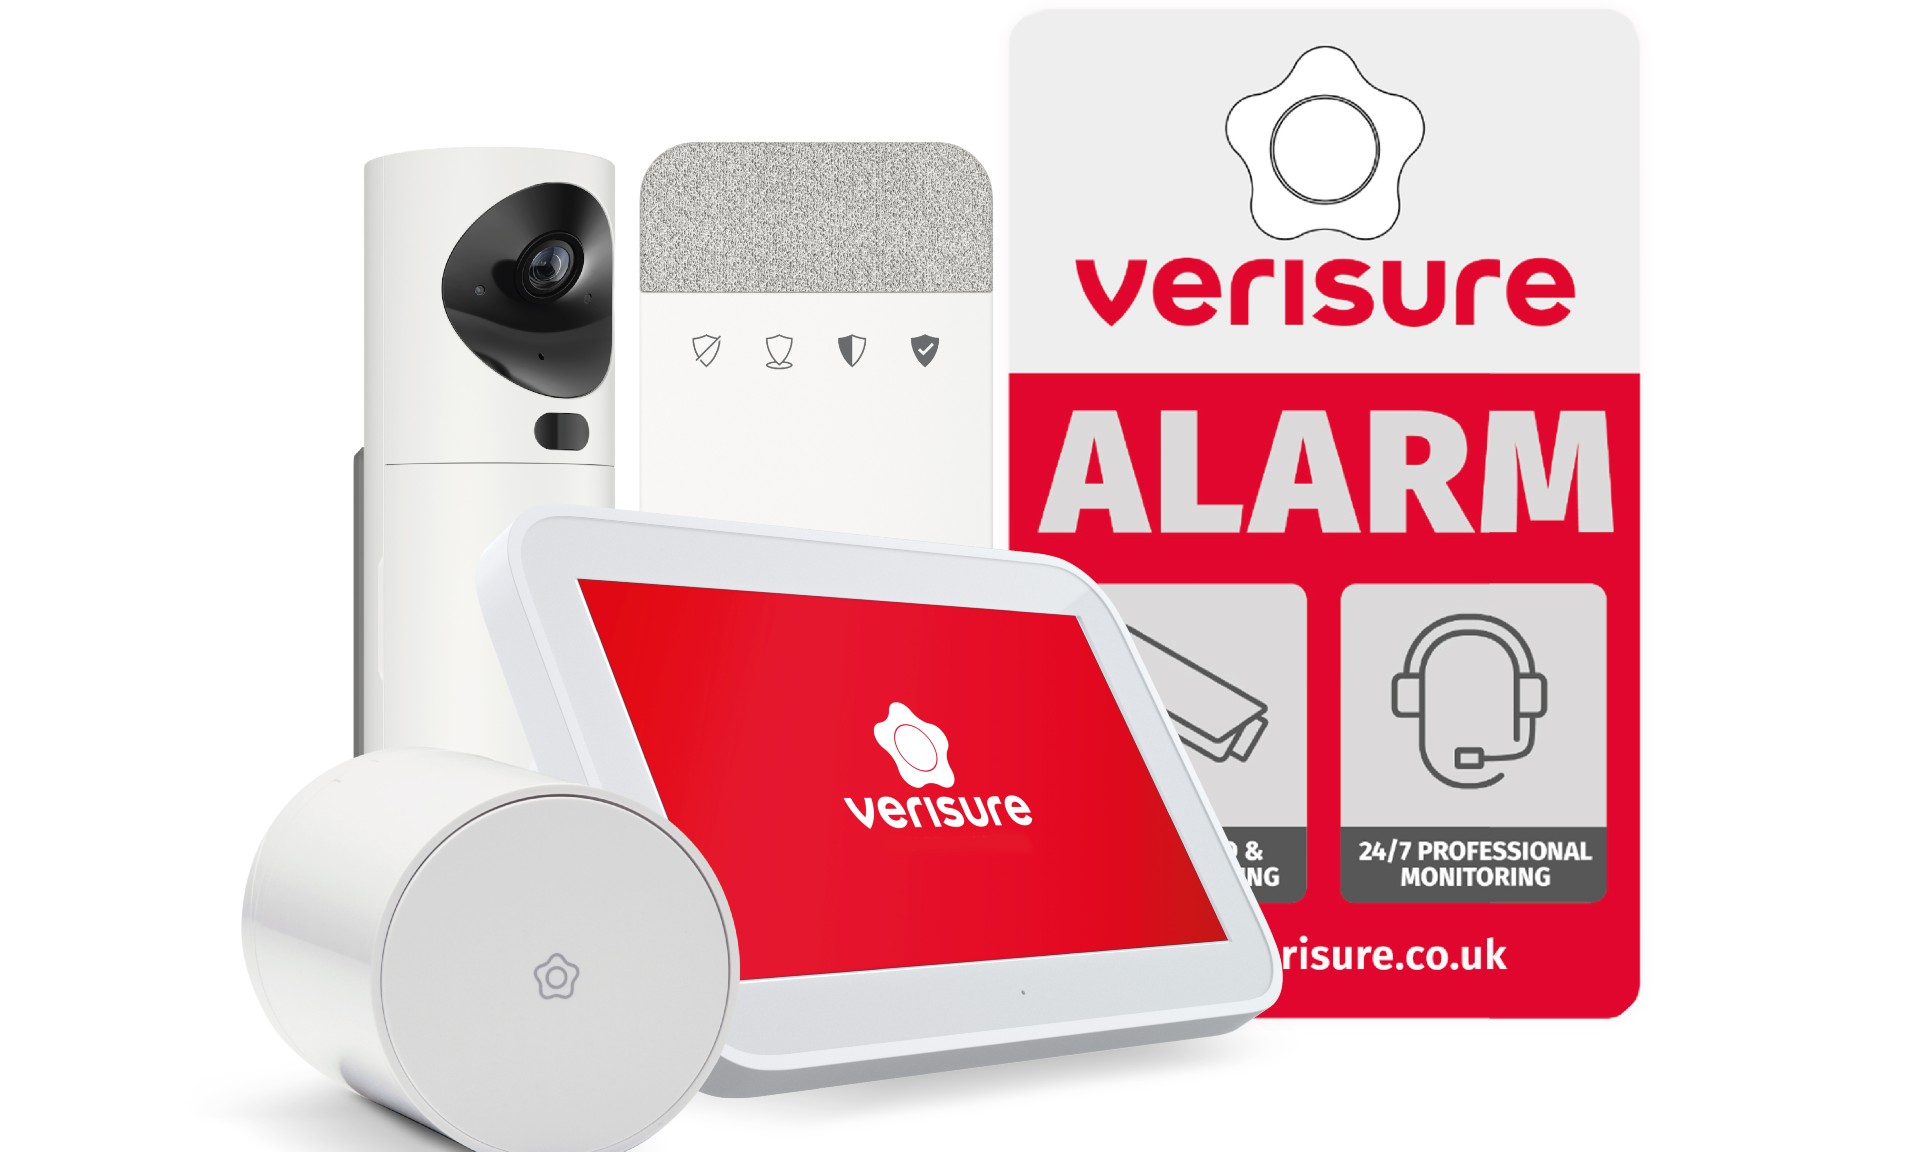 Verisure takes home security to a new level of protection